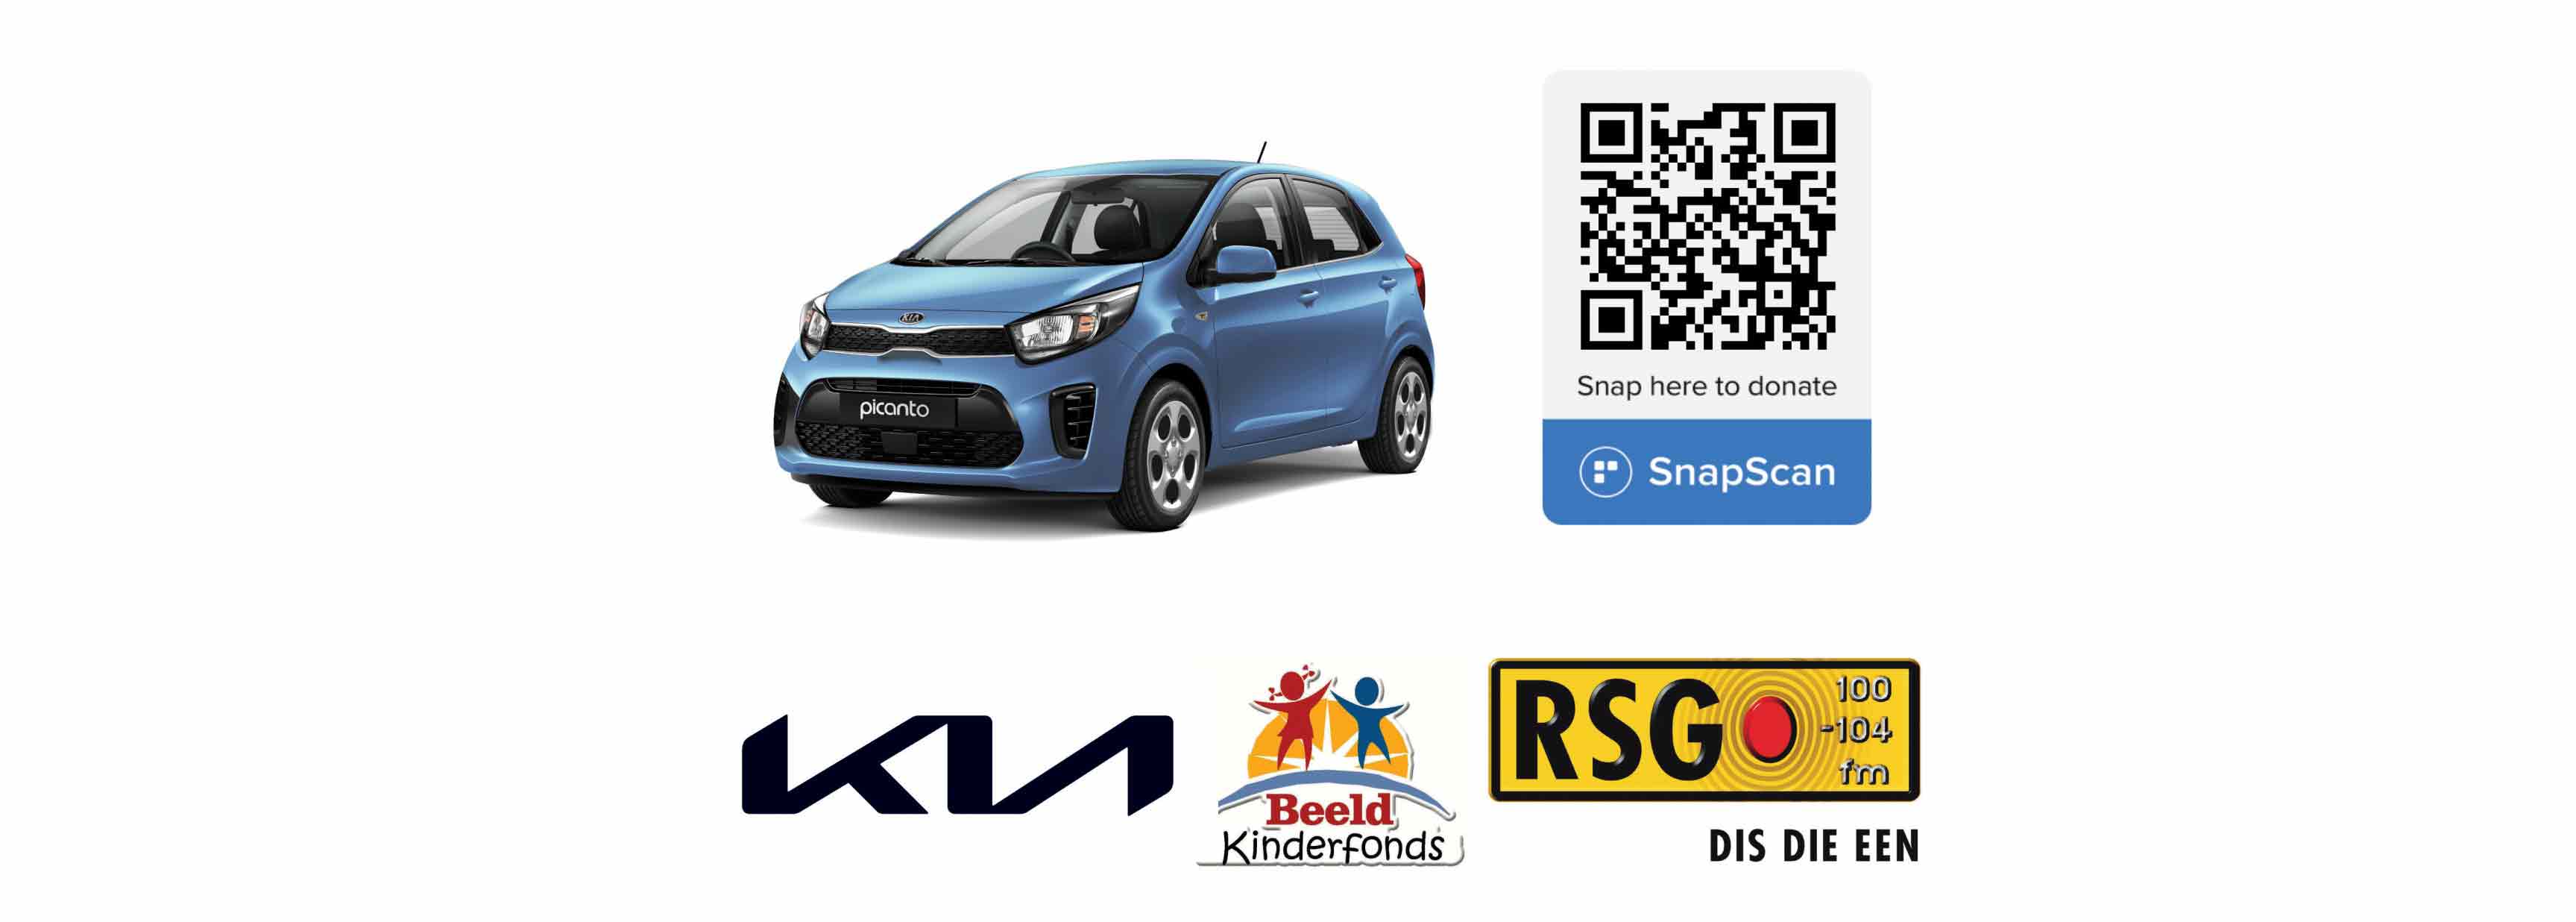 Win a Kia Picanto by supporting the Beeld Children’s fund